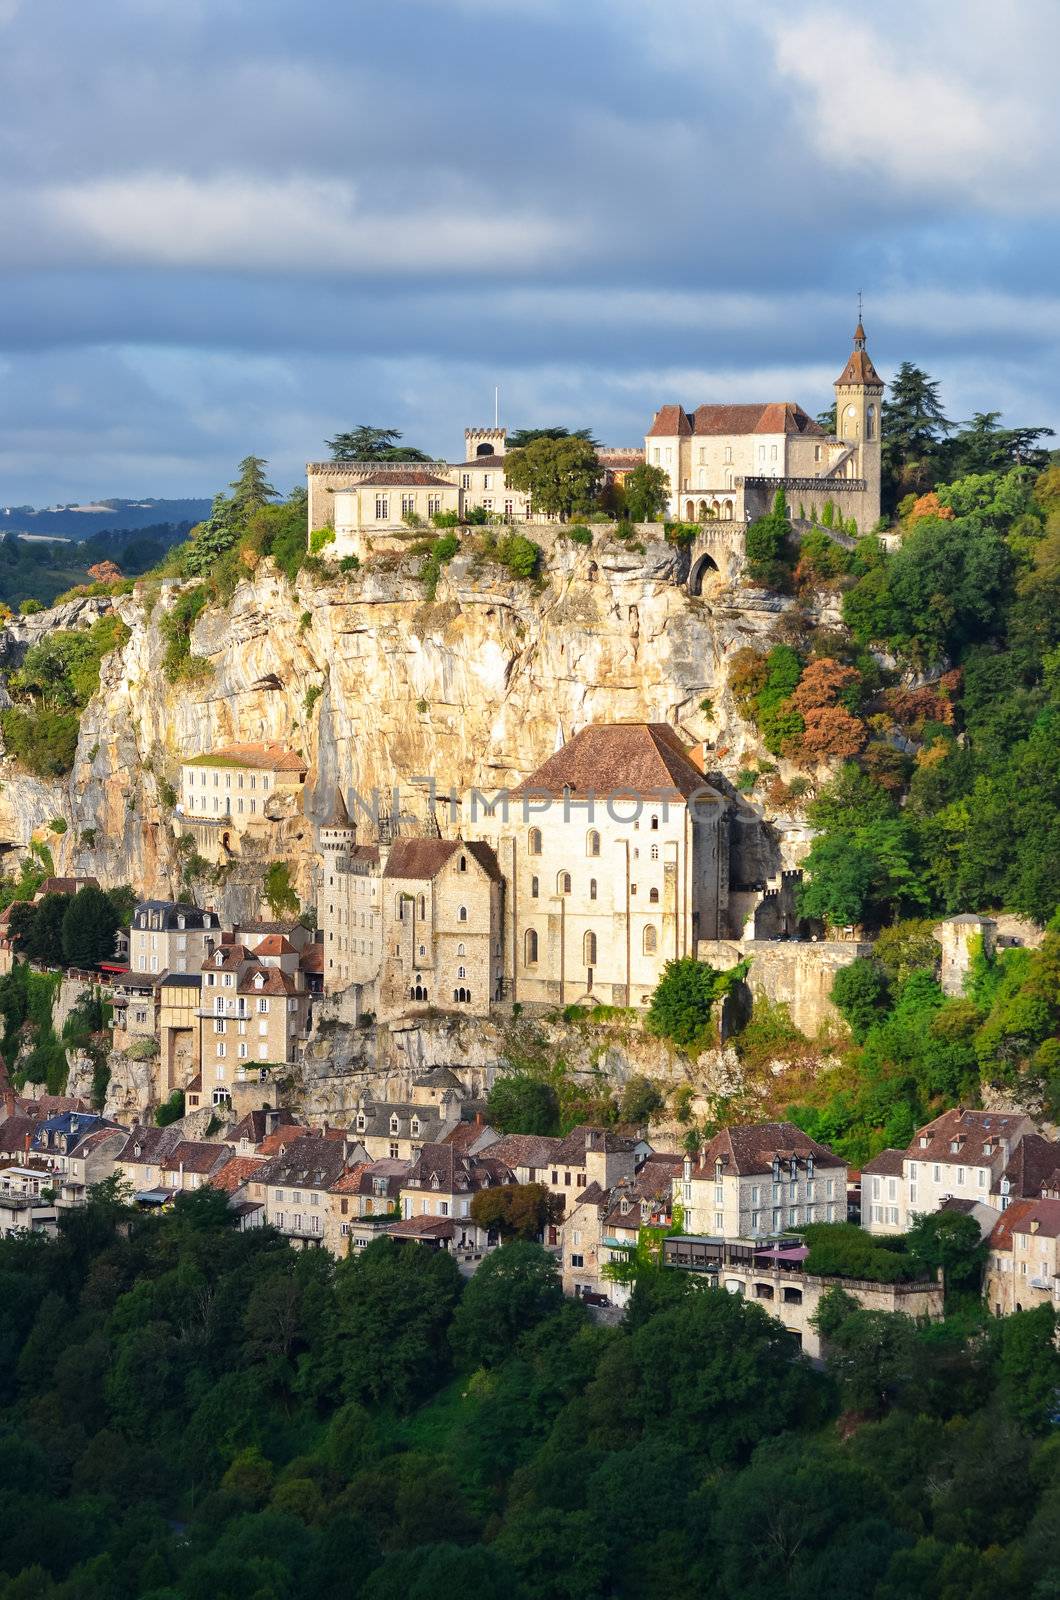 Rocamadour village vertical view with the sky, France